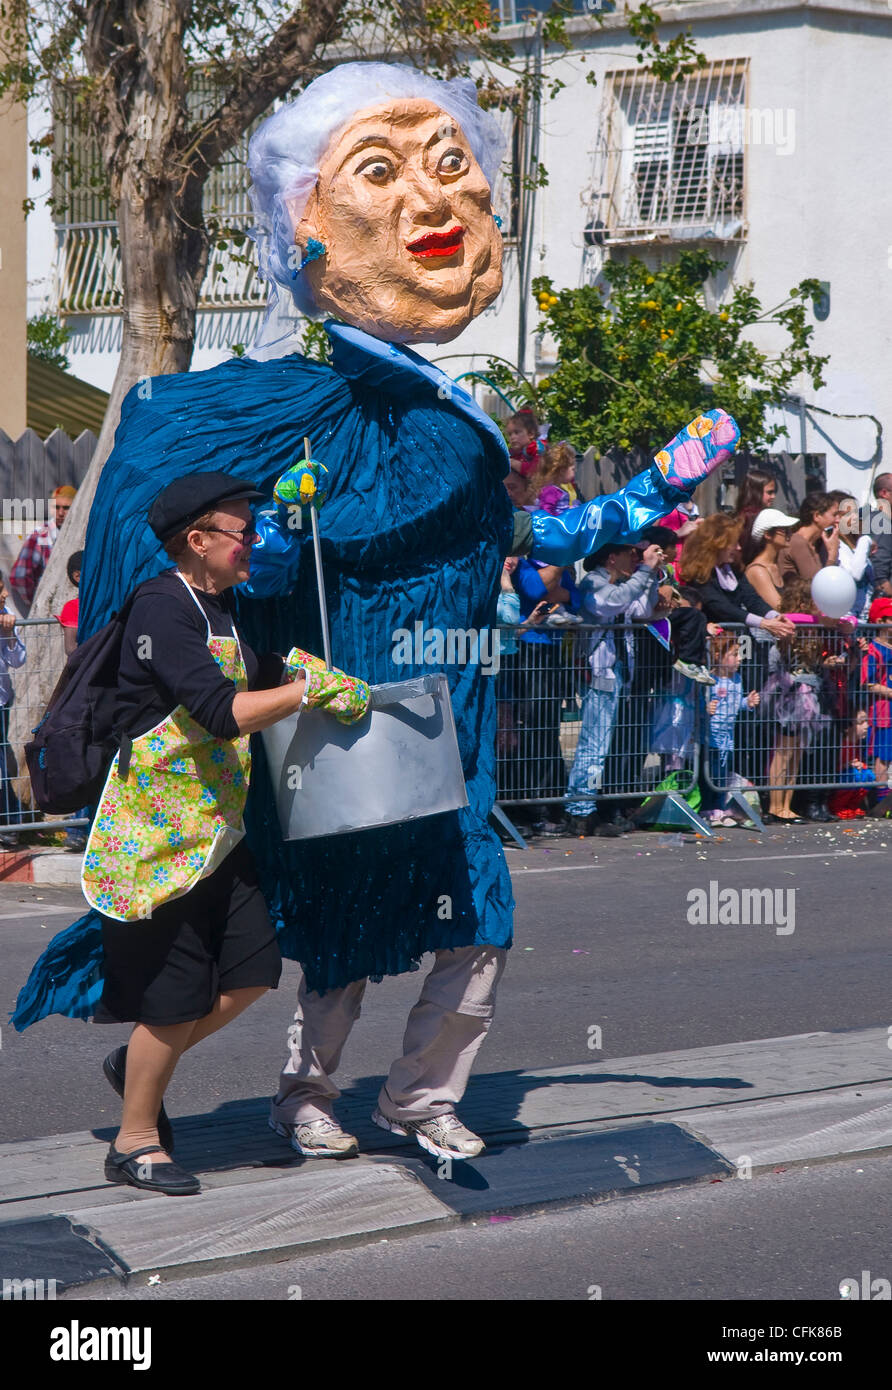 Giant puppet pass through the street during the Adloyada event in Holon Israel Stock Photo